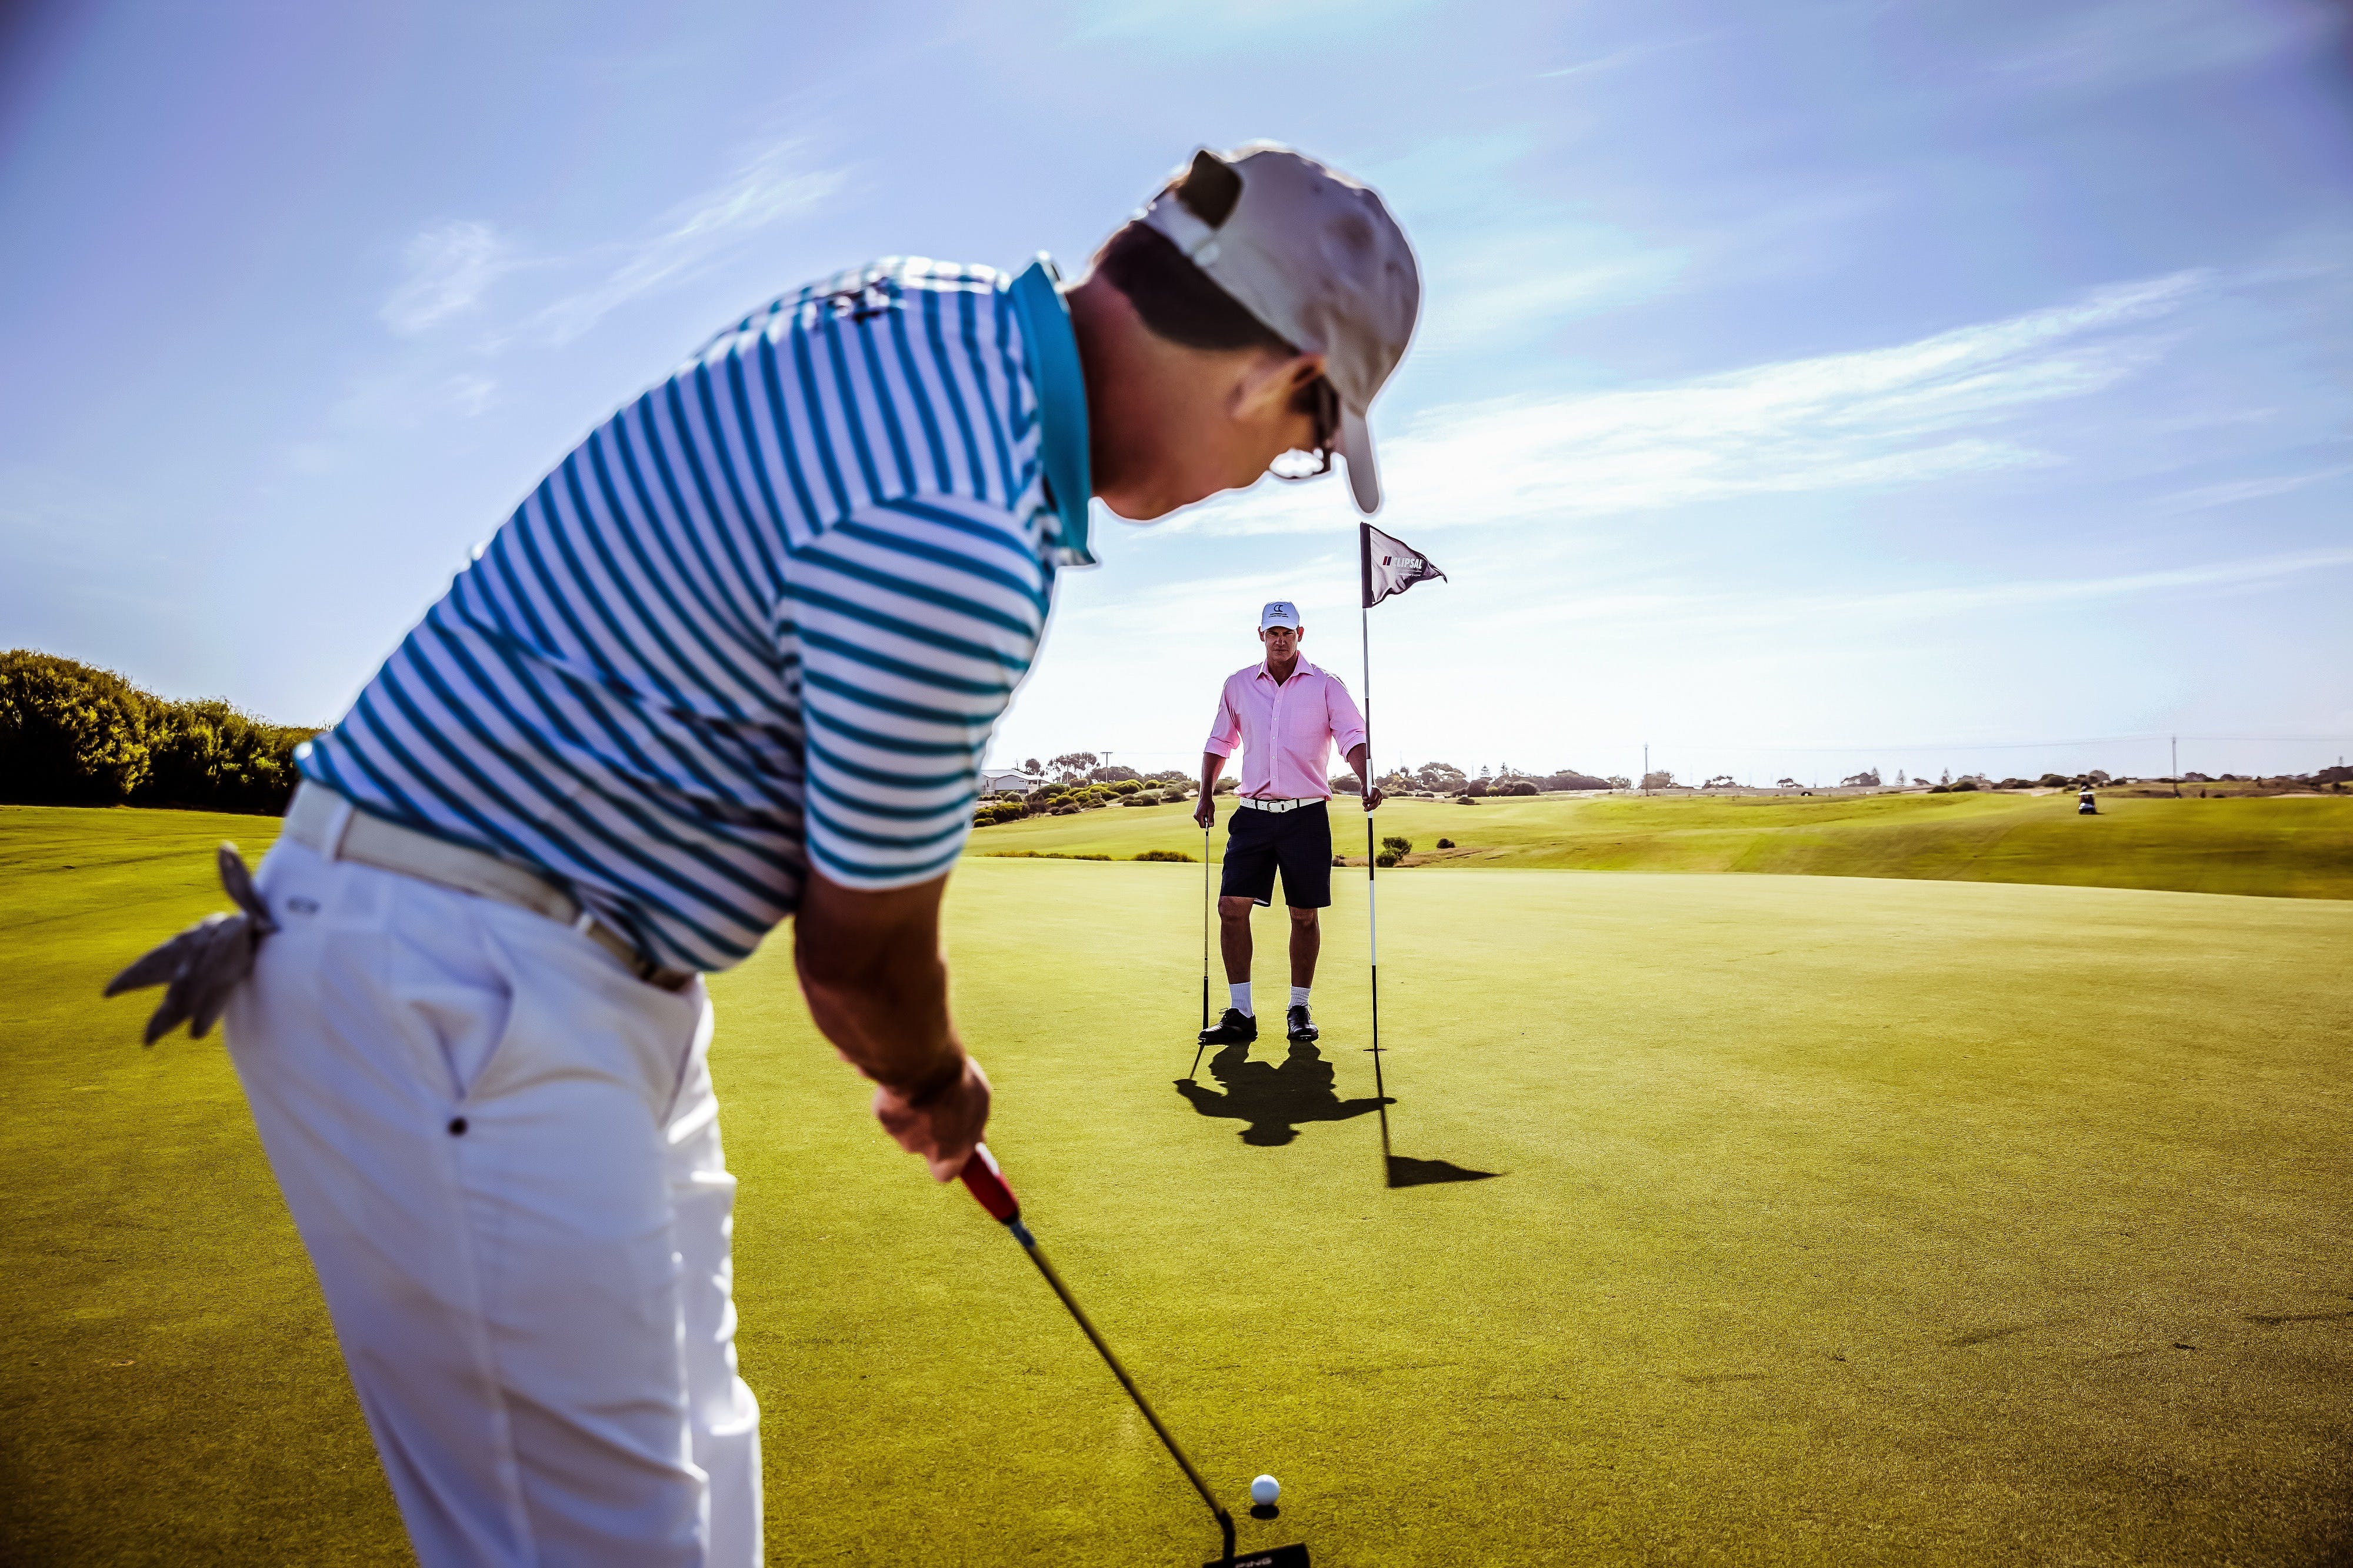 Copper Club The Dunes Golf Course - Carnarvon Accommodation